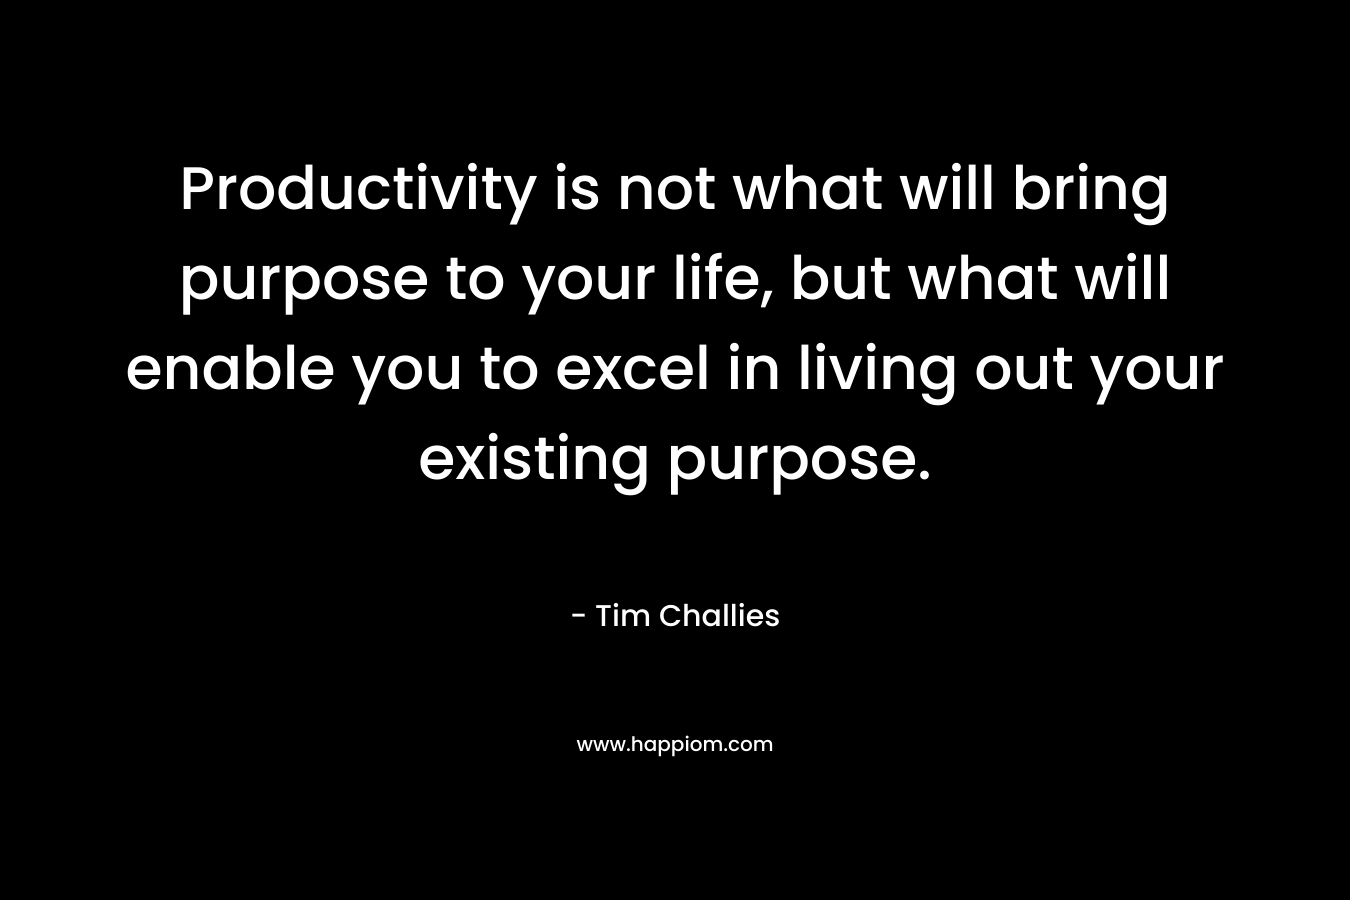 Productivity is not what will bring purpose to your life, but what will enable you to excel in living out your existing purpose.